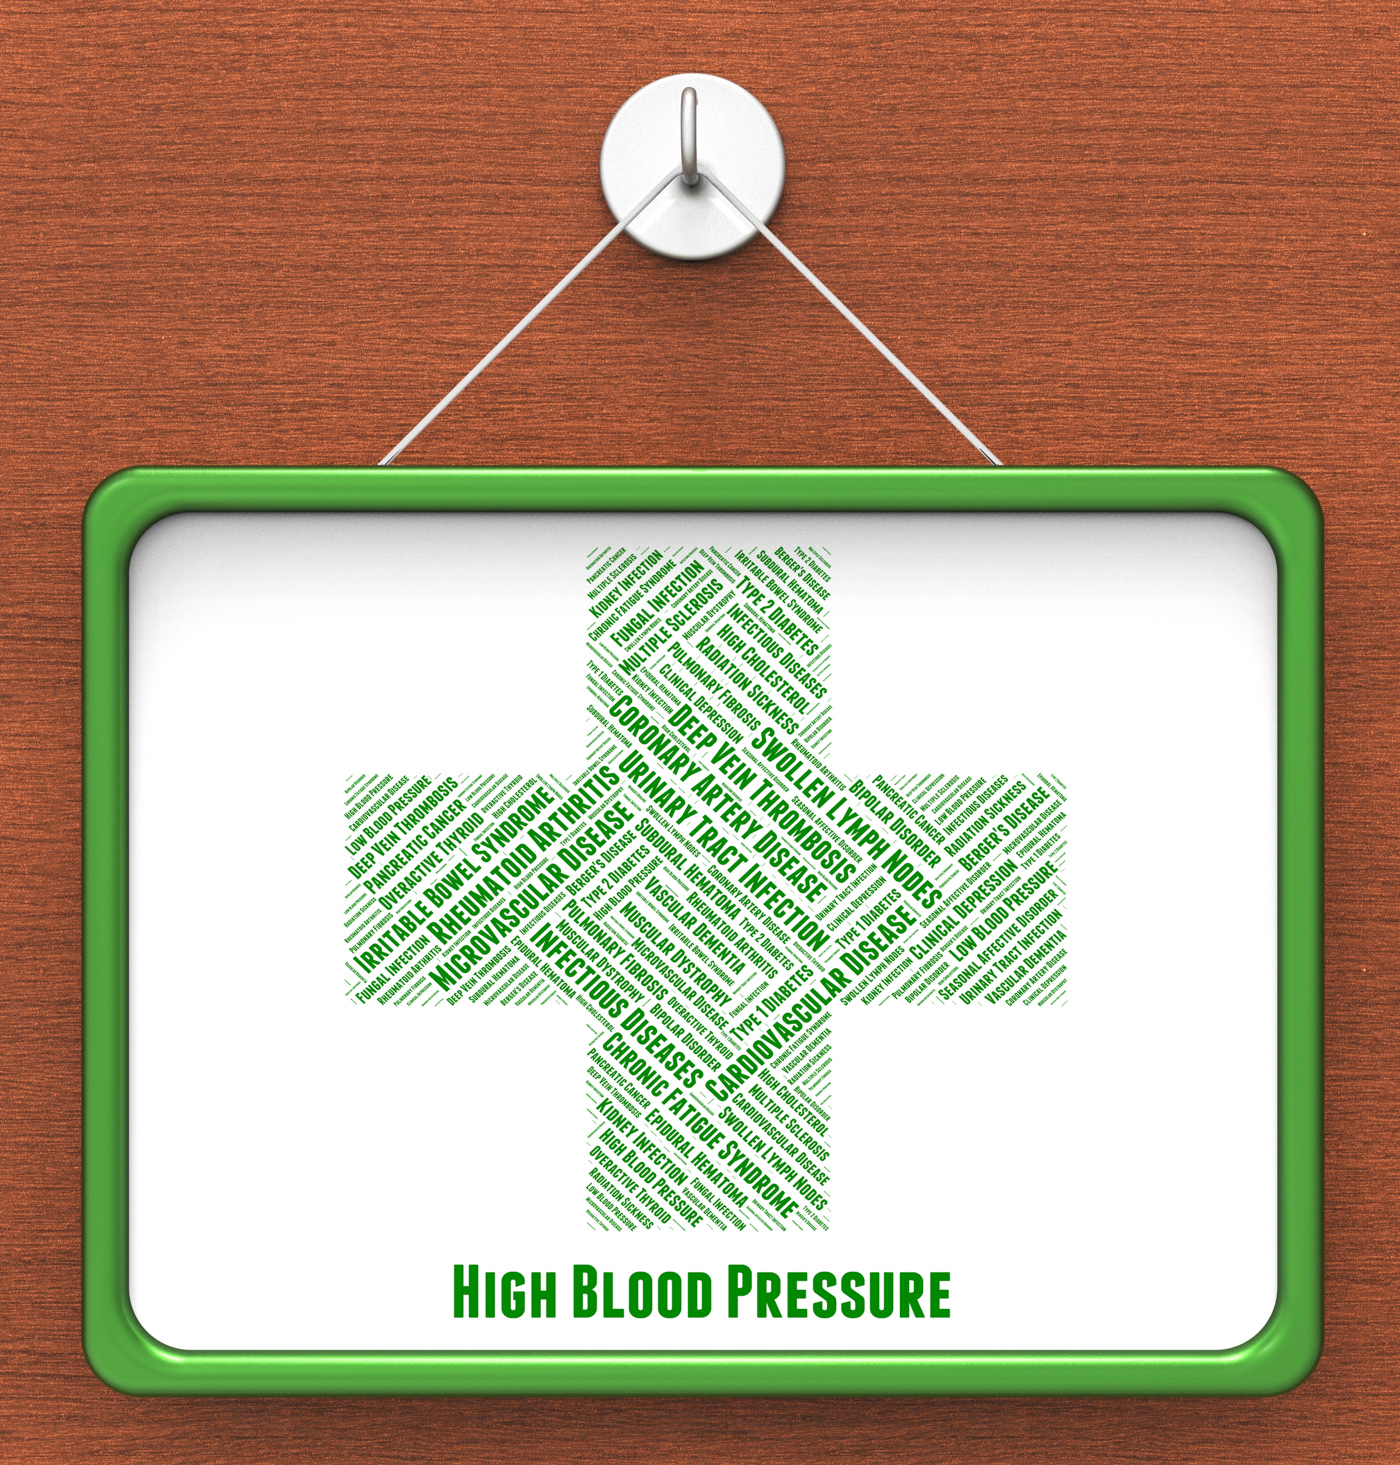 High Blood Pressure Means Poor Health And Afflictions, High, Pressures, Pressure, Poorhealth, HQ Photo